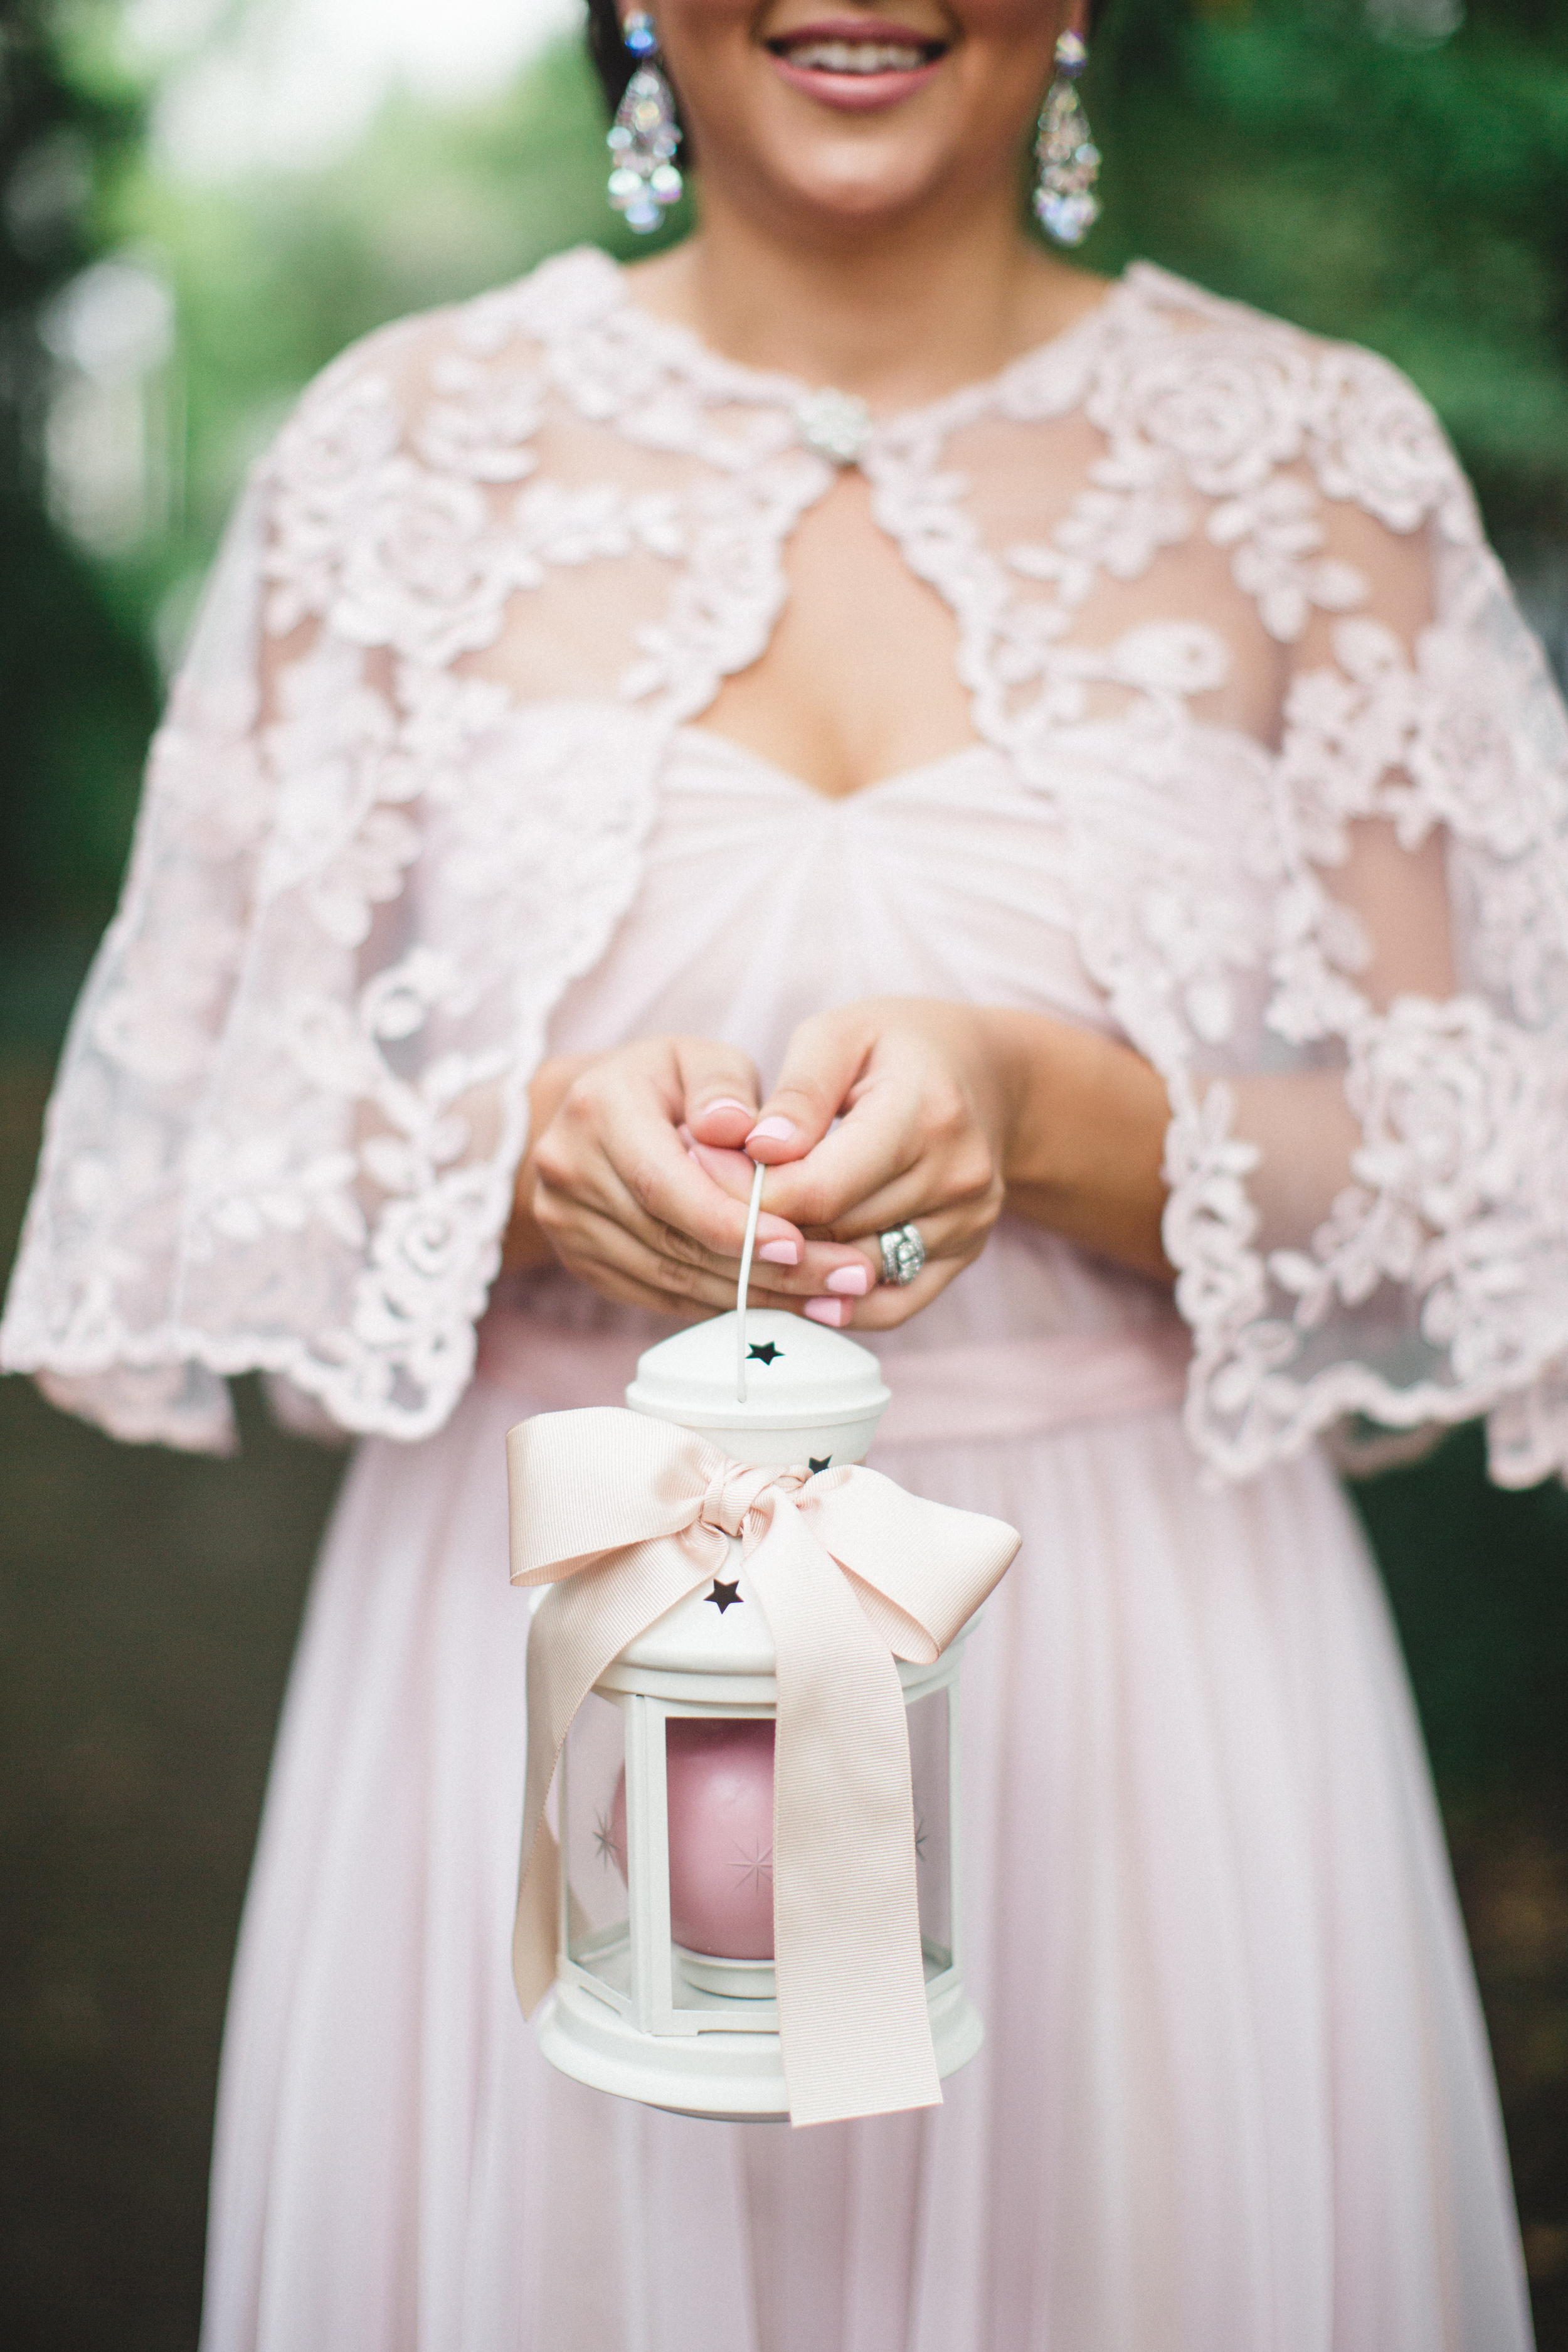 daniela-and-pedro-wedding-izzy-hudgins-photography-a-to-zinnias-whitfield-square-charles-h-morris-center-wedding-ivoyy-and-beau-bridal-boutique-dorie-hayley-paige-savannah-wedding-planner-savannah-bridal-boutique-savannah-weddings-18.jpg